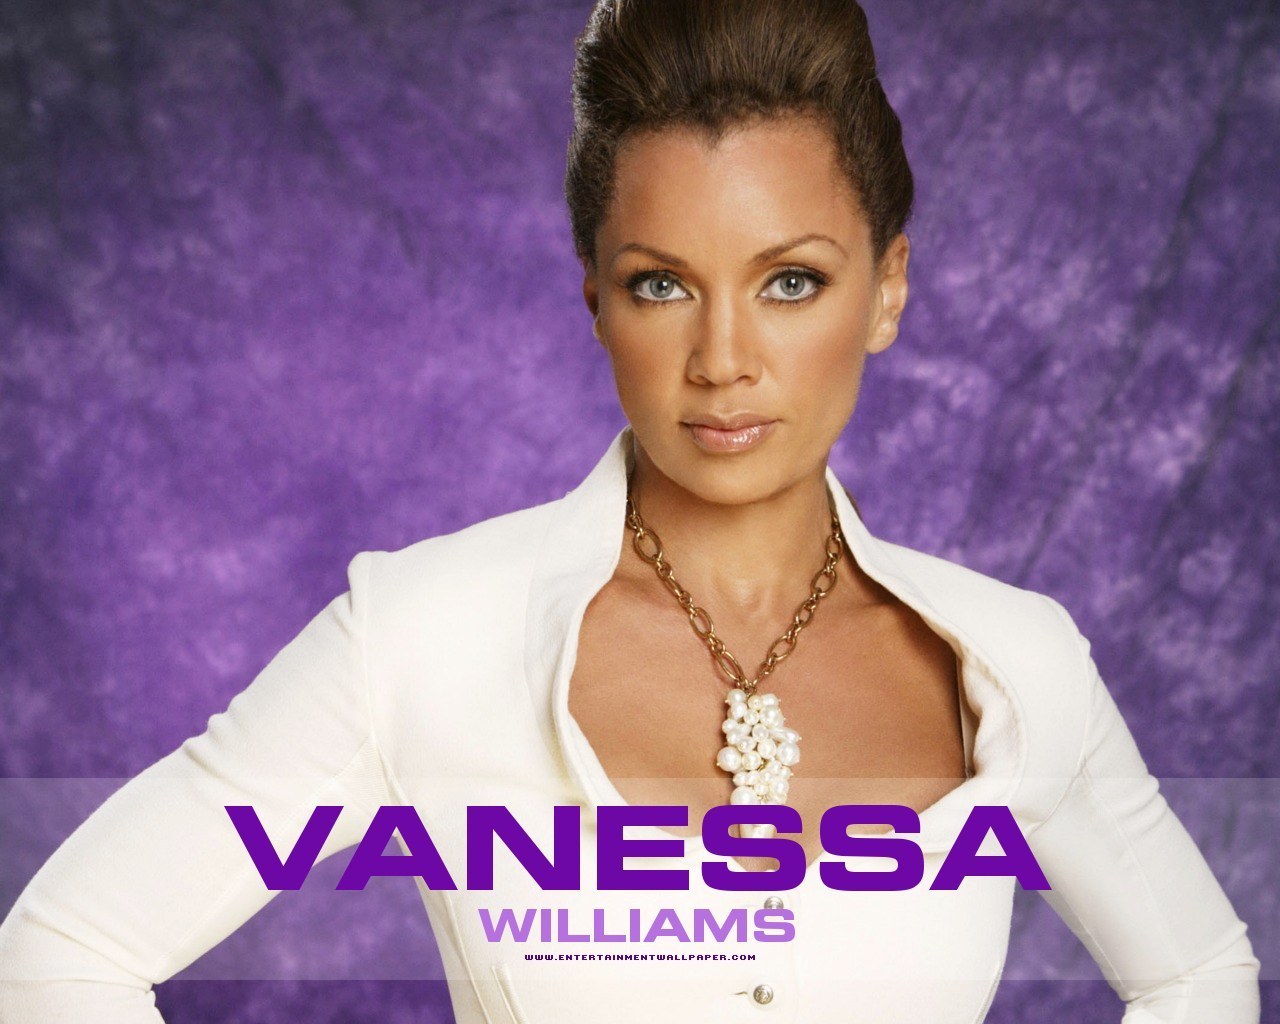 Vanessa Williams Image HD Wallpaper And Background Photos